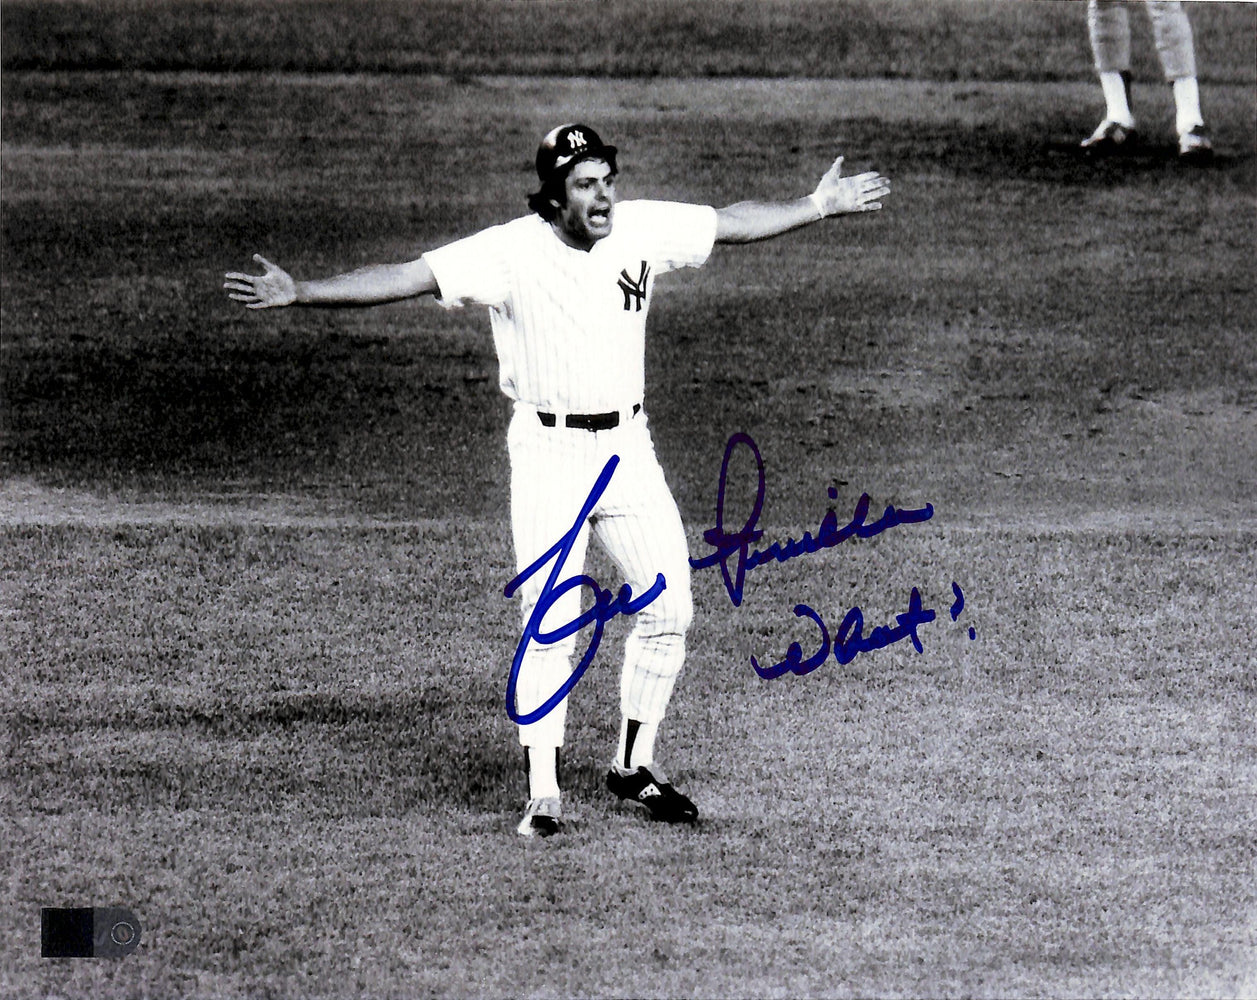 lou piniella signed and inscribed what 8x10 photo aiv certificate of authenticity